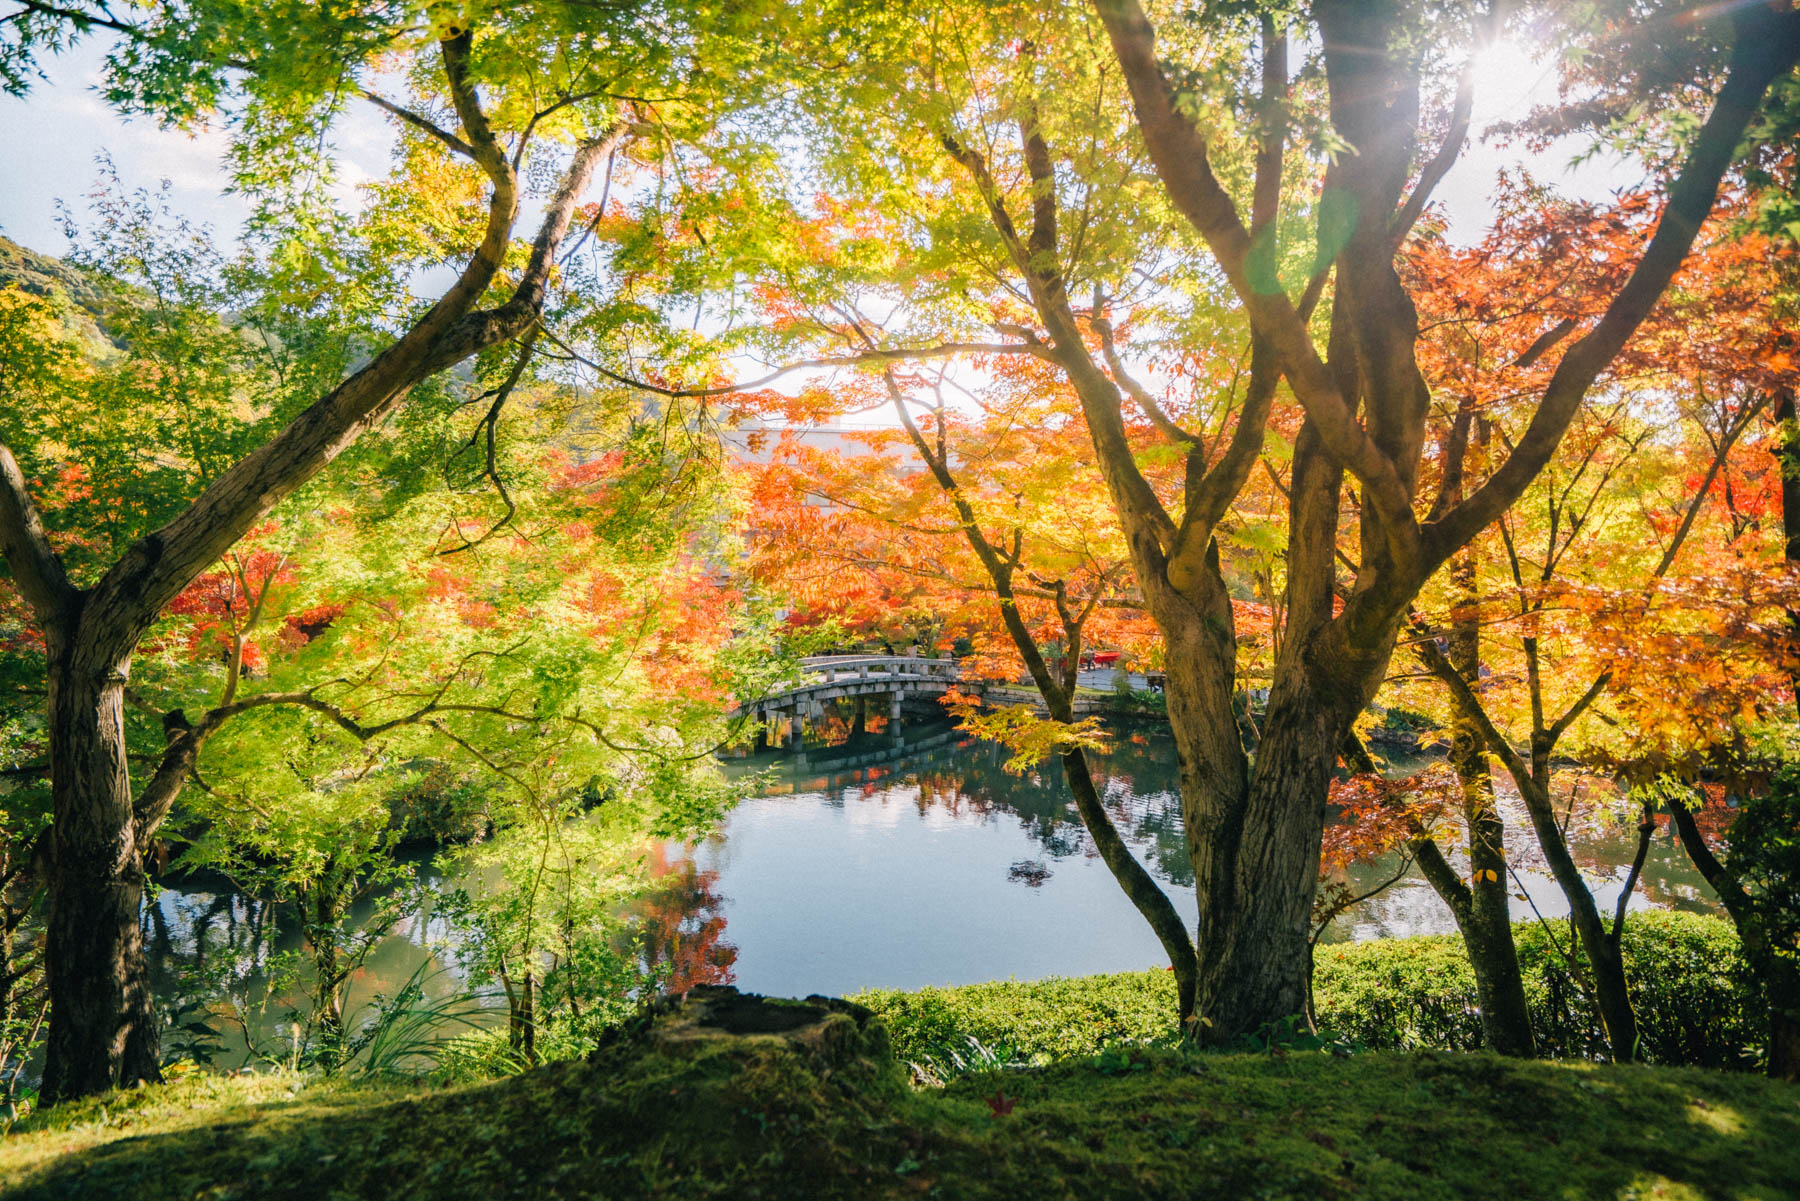 Kyoto in fall